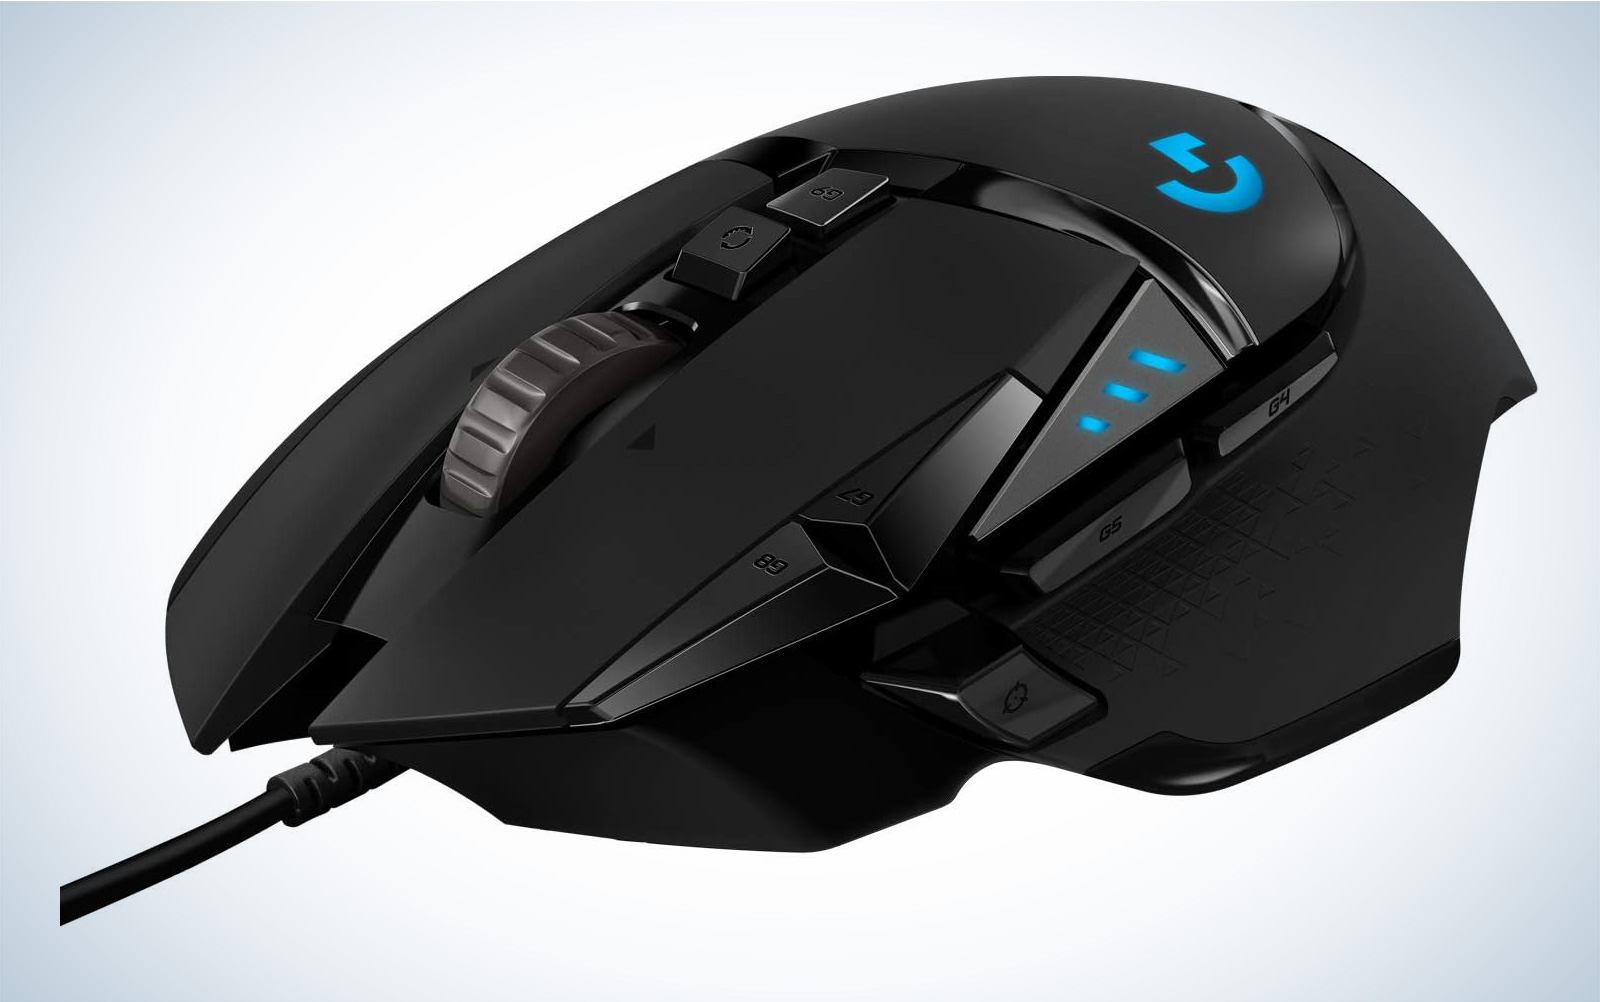 Logitech G502 Hero gaming mouse on a plain background